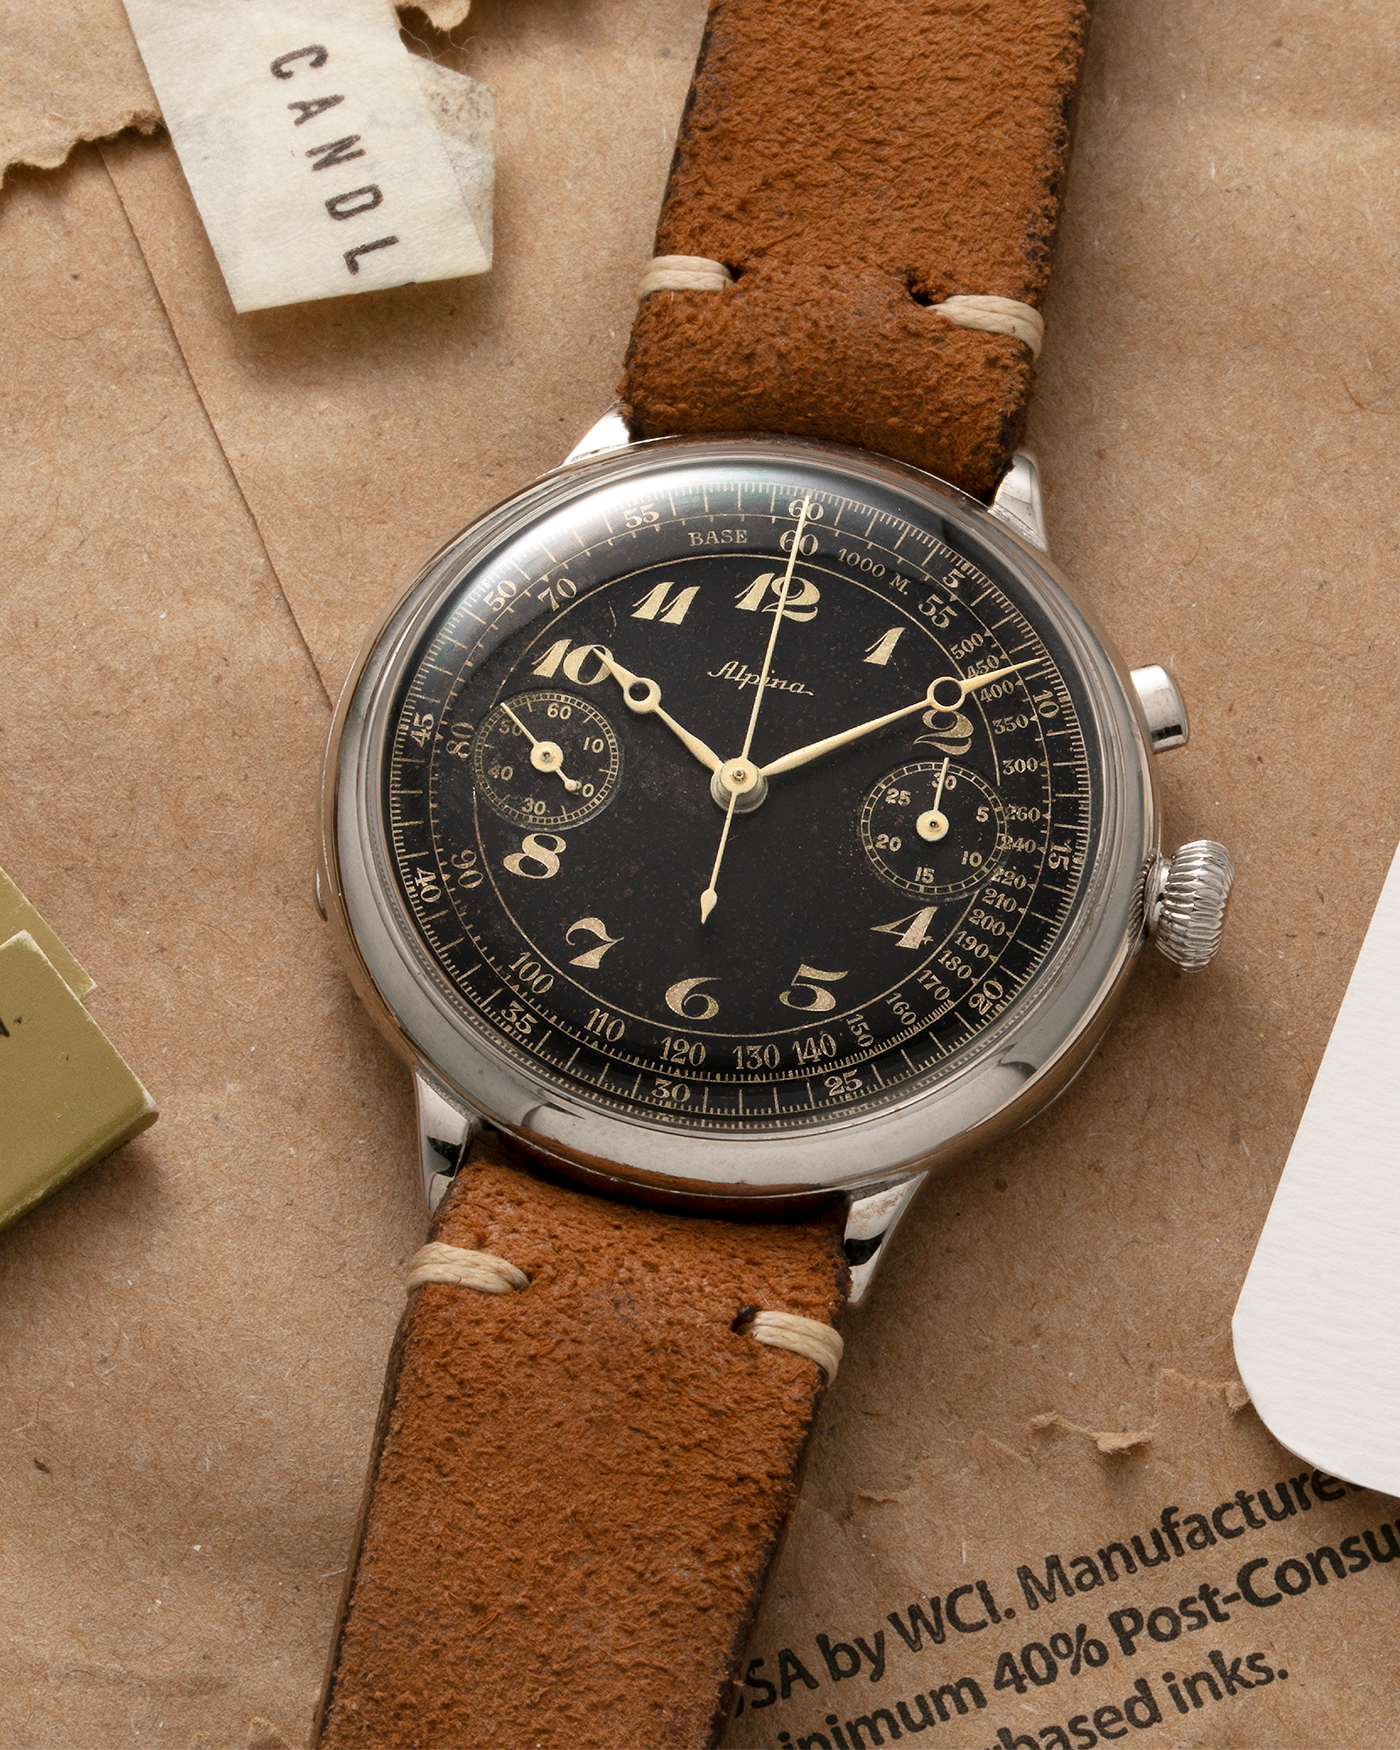 Brand: Alpina Model: Monopusher Chronograph Serial Number: 392919 Year: 1930’s Material: Nickel Chrome Movement: Modified Landeron-Hahn Caliber, Manual-Winding Case Diameter: 41mm Lug Width: 18mm Strap: Unnamed Open End Distressed Brown Leather Strap